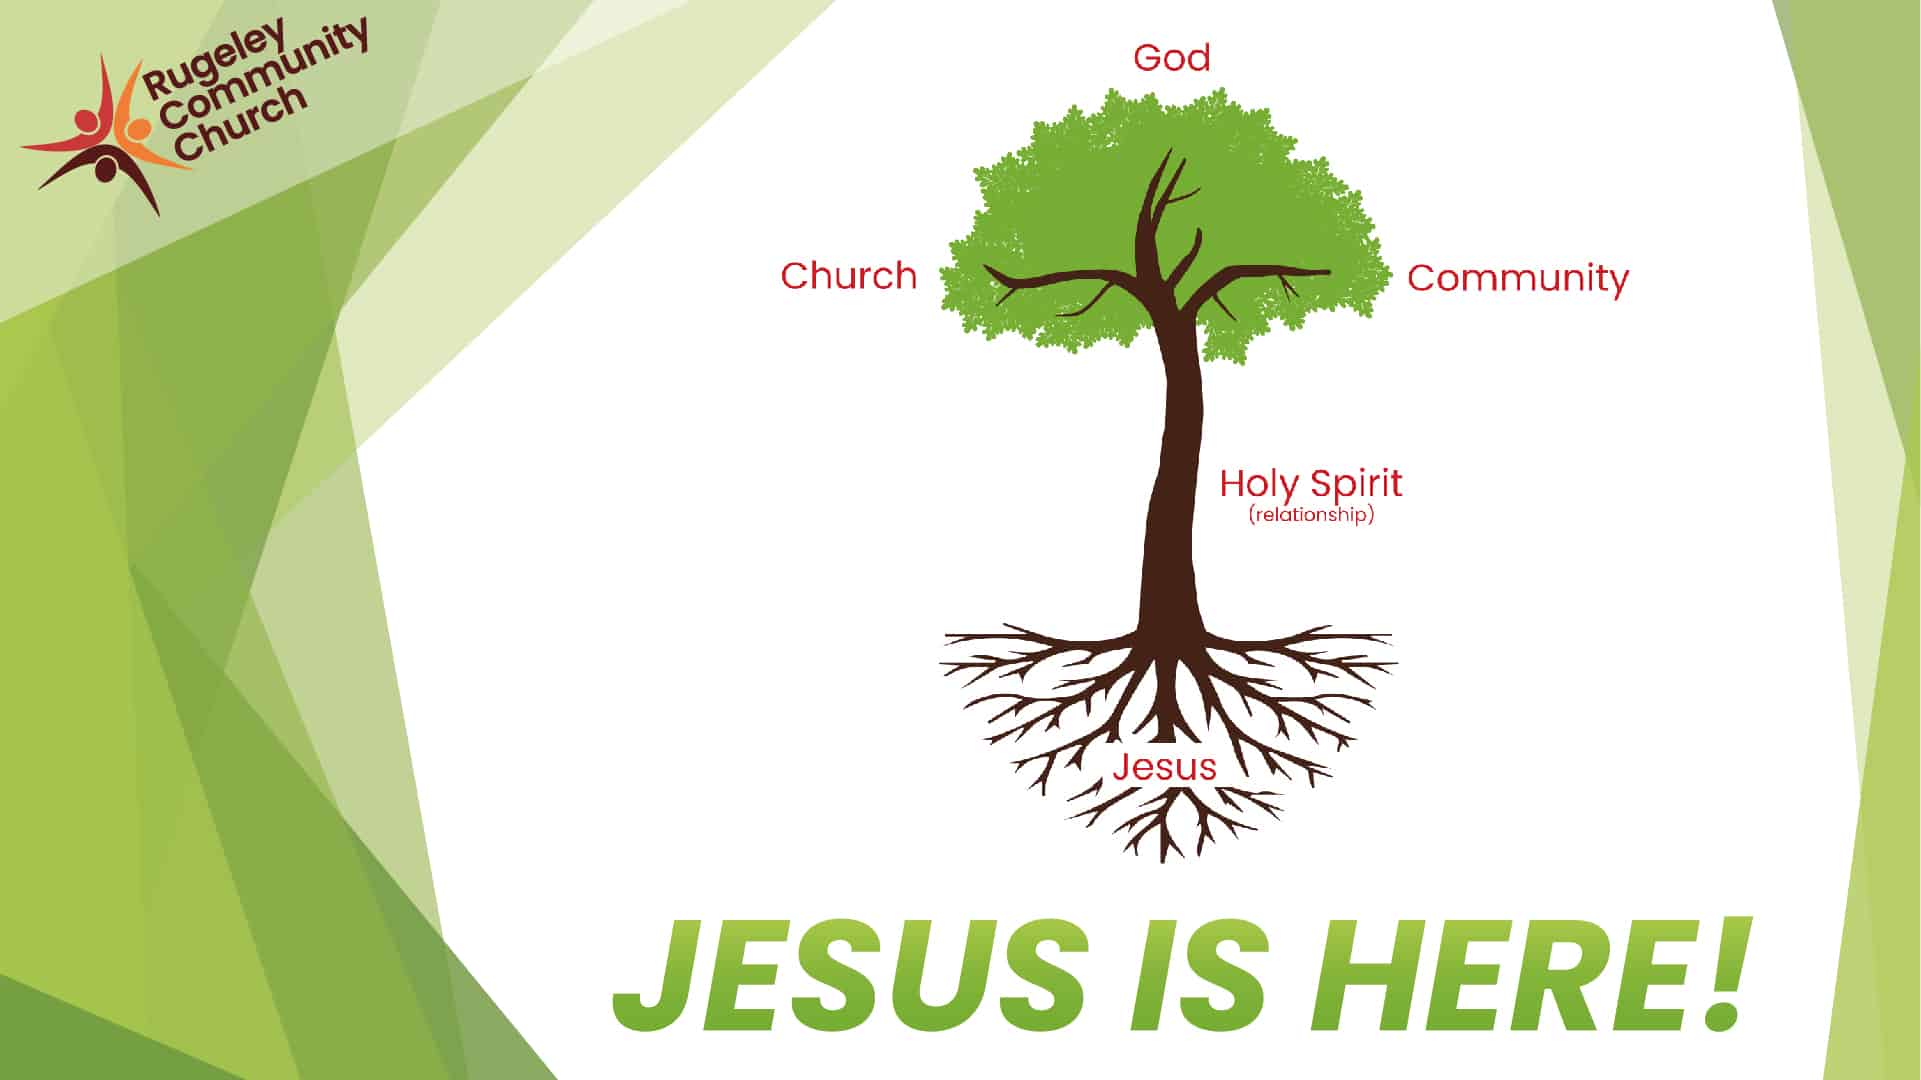 An image showing The Kingdom Tree, Rooted in Jesus, Holy Spirit is the Trunk giving life to the fruit, the fruit is in 3 parts, Church, God and Community.